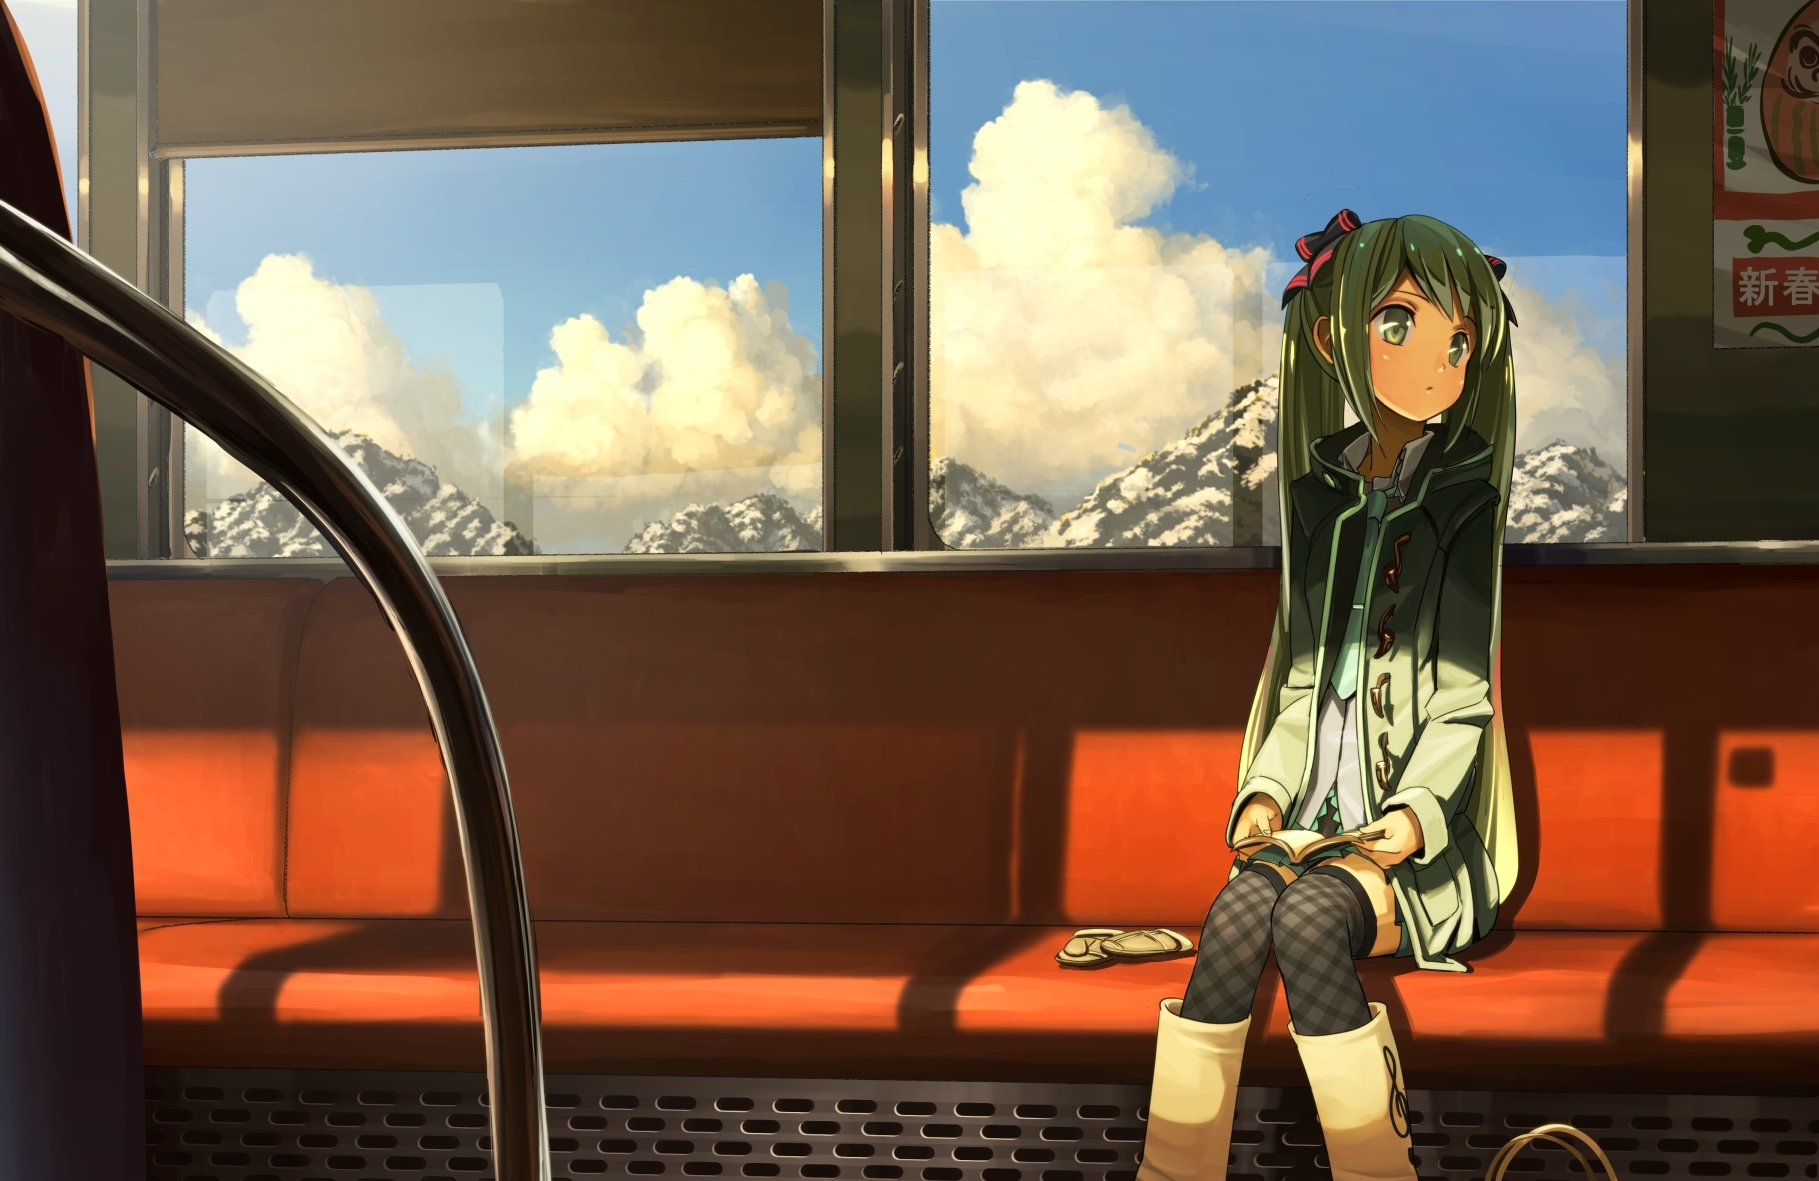 Anime 1819x1181 Vocaloid anime girls anime train green hair vehicle sitting sky clouds thighs together stockings looking away books long hair